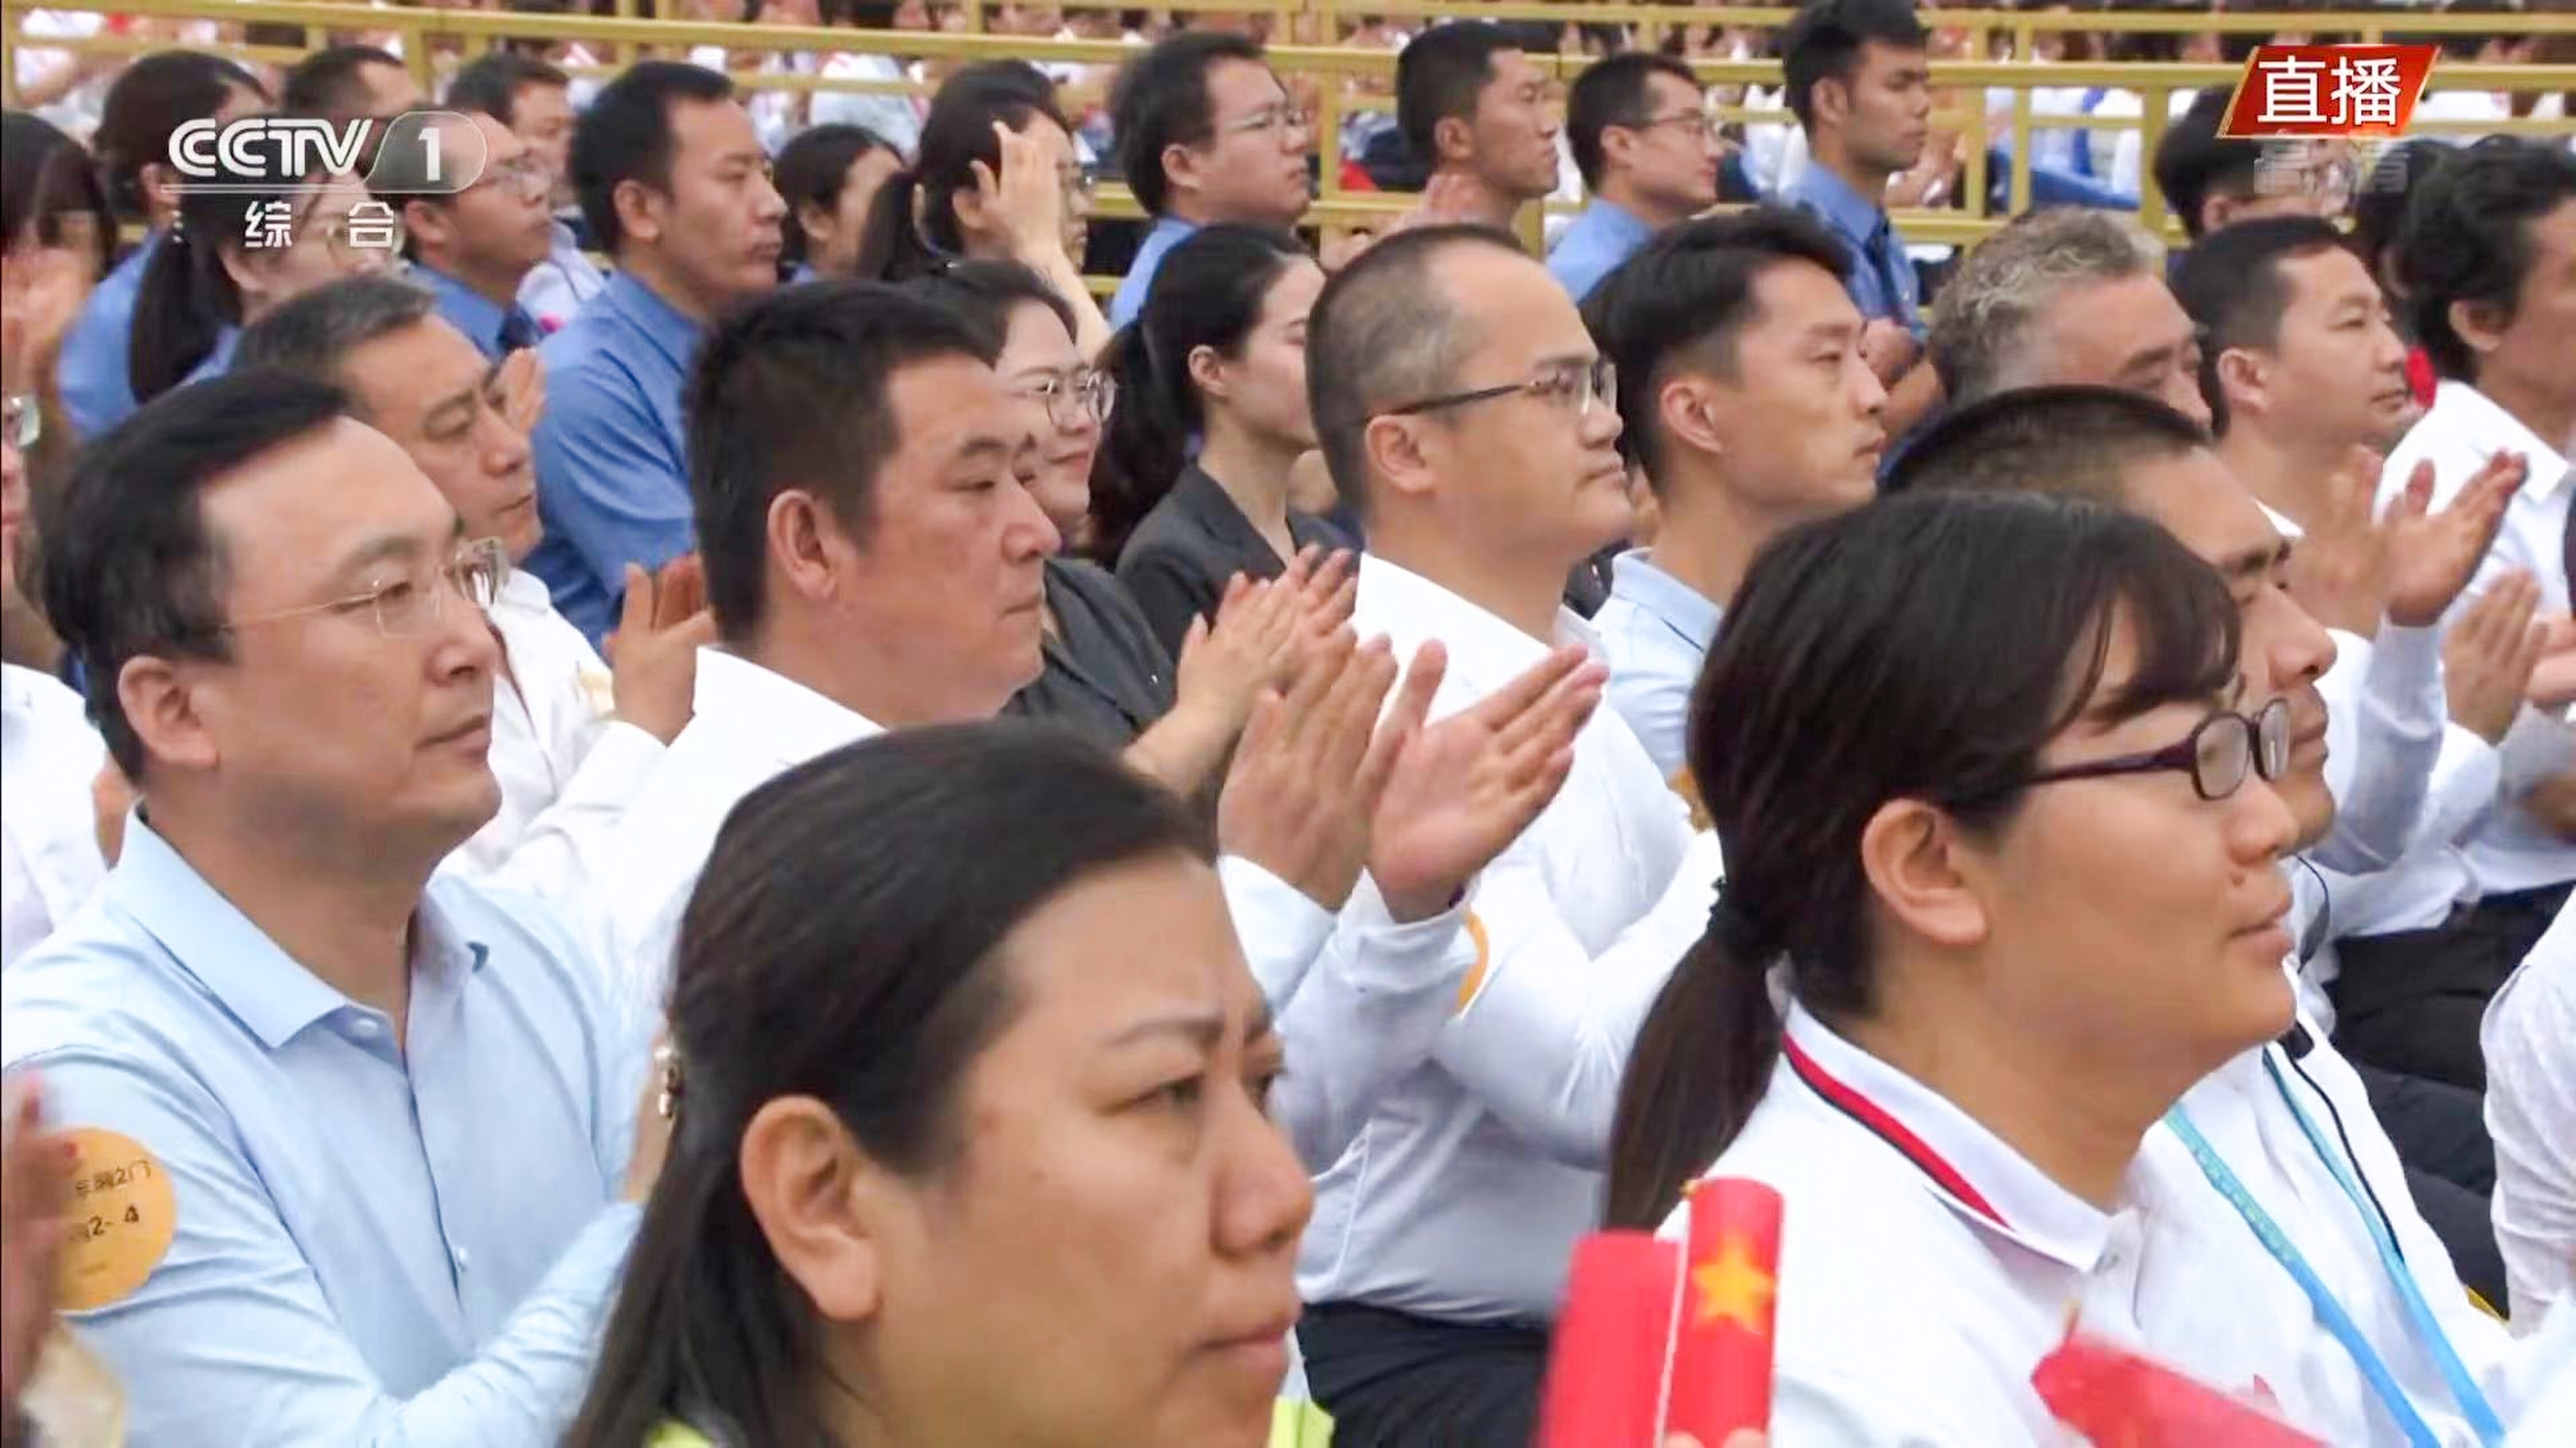 Meituan’s founder and chief executive Wang Xing (centre right, wearing white shirt and glasses) in the live broadcast of the Communist Party’s centenary celebrations. Photo: CCTV